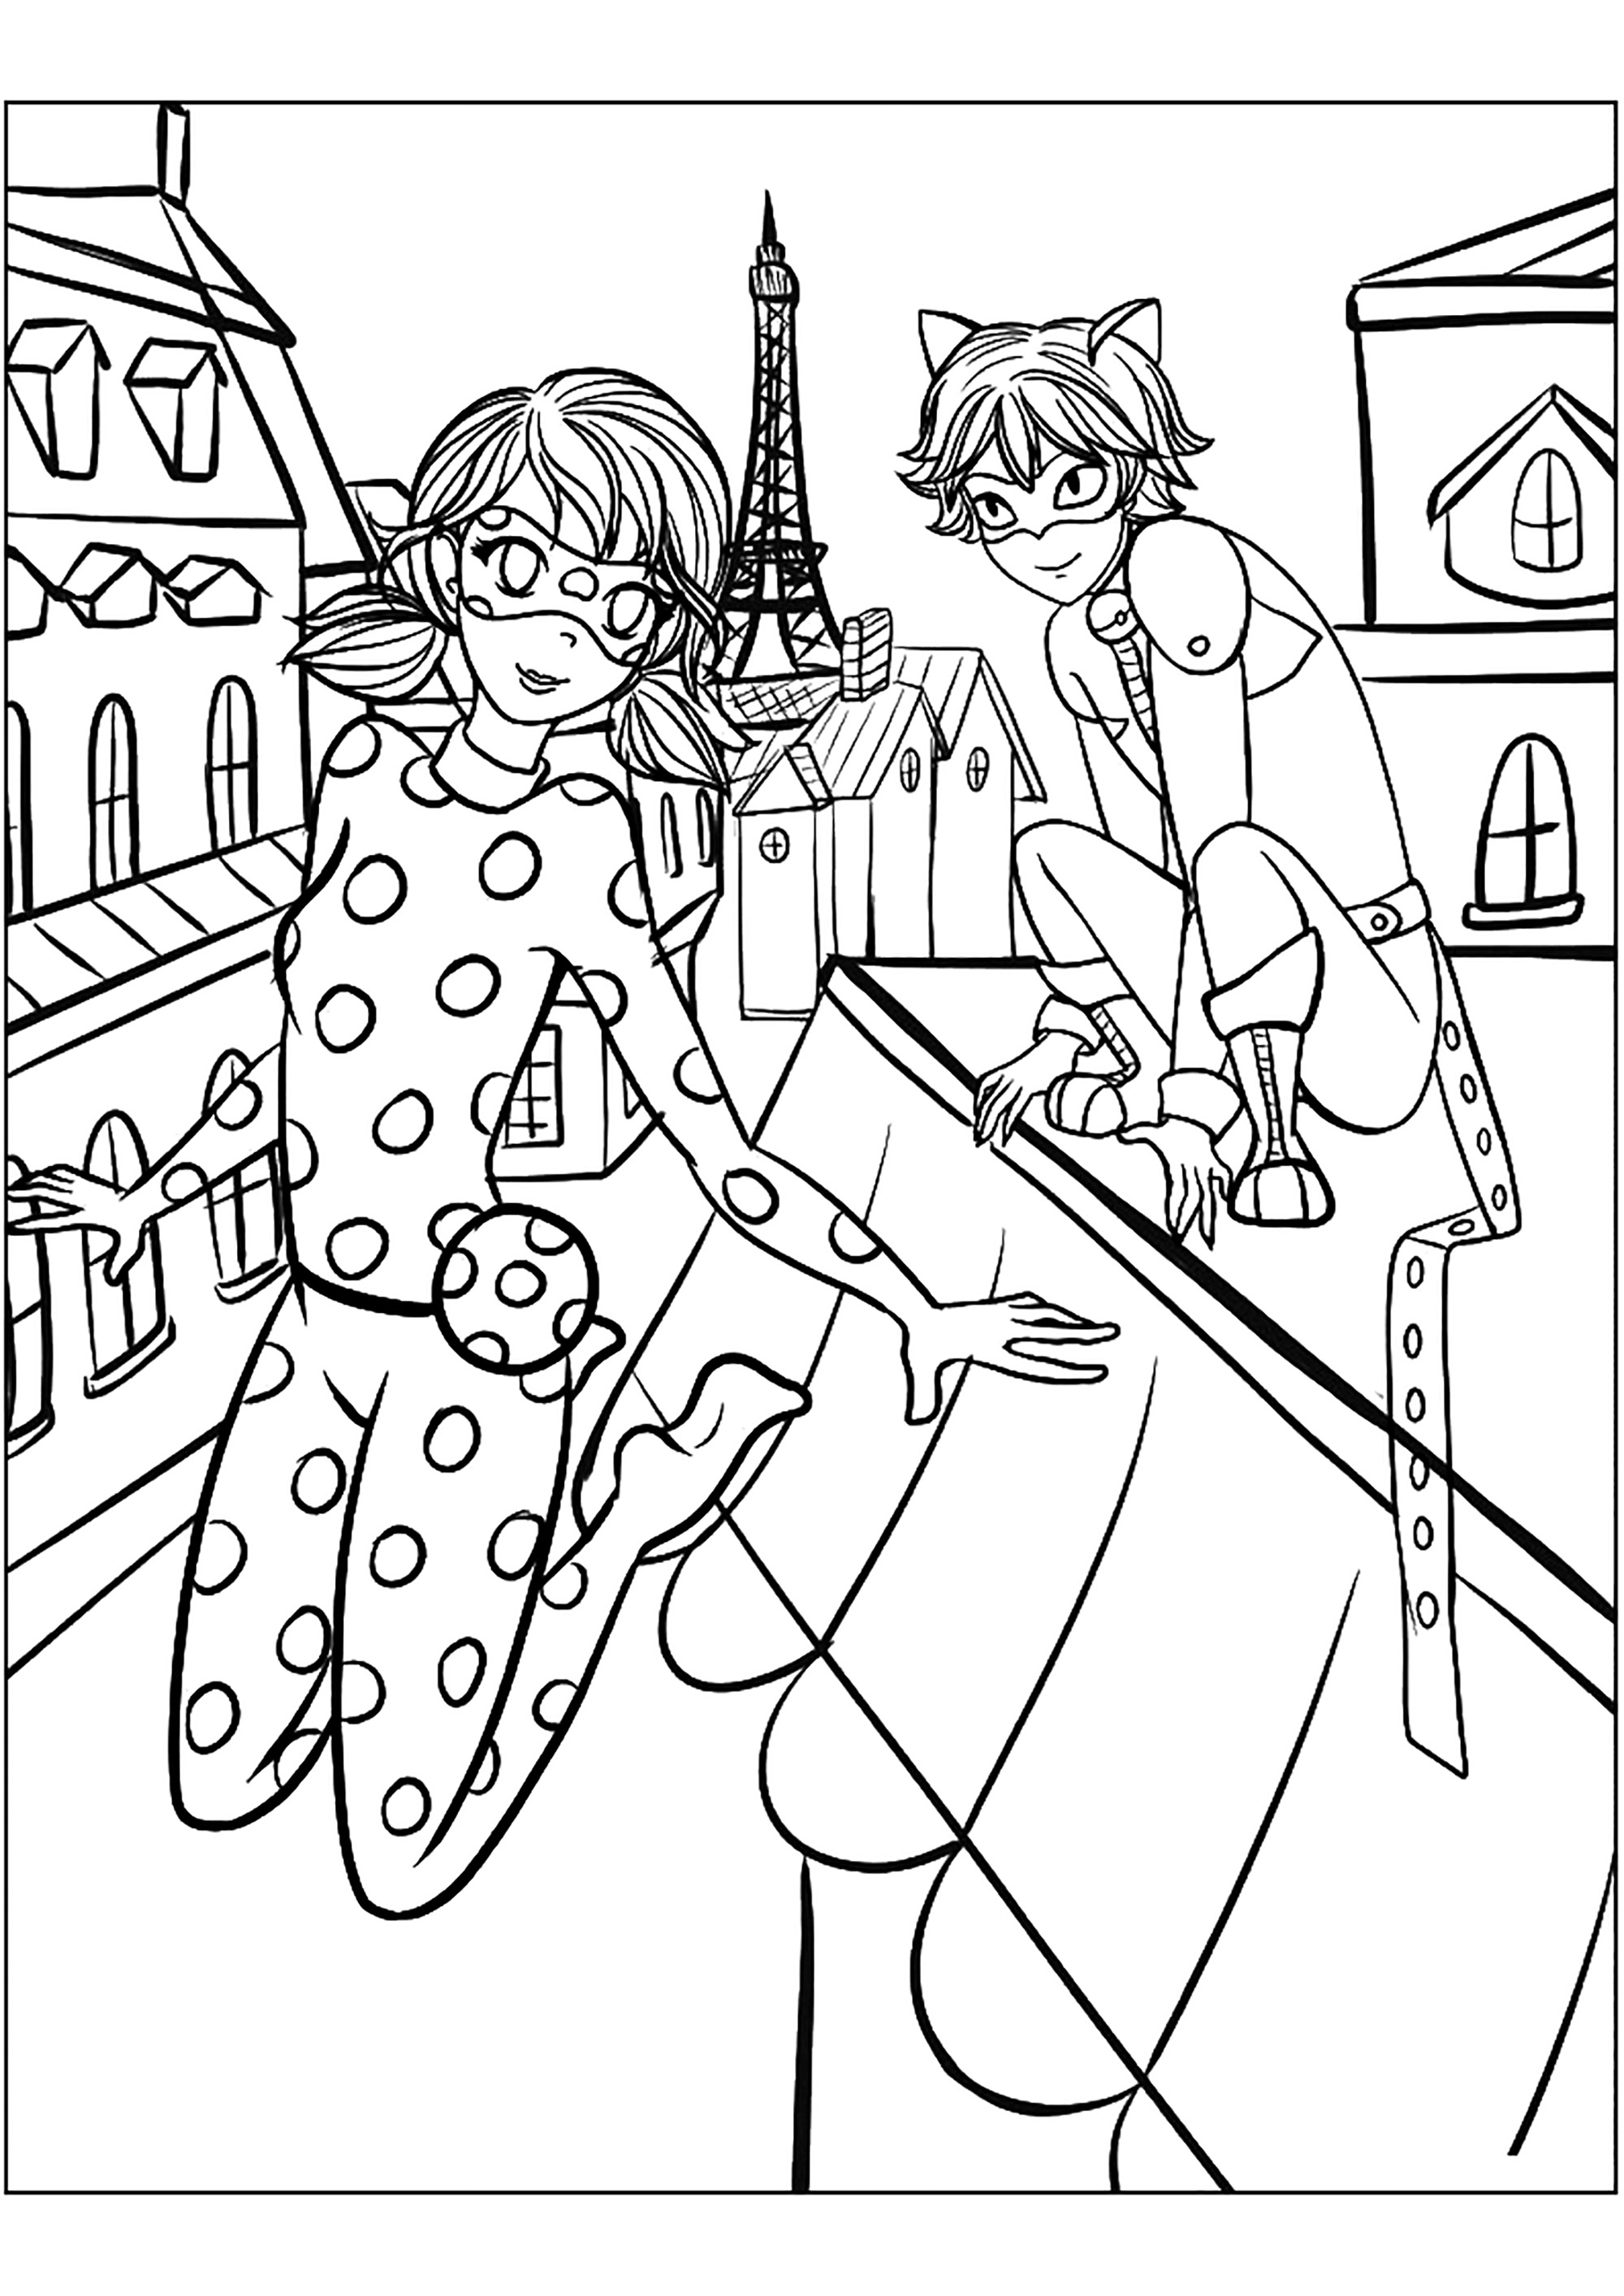 Miraculous Lady Bug Free To Color For Children Miraculous Ladybug Kids Coloring Pages